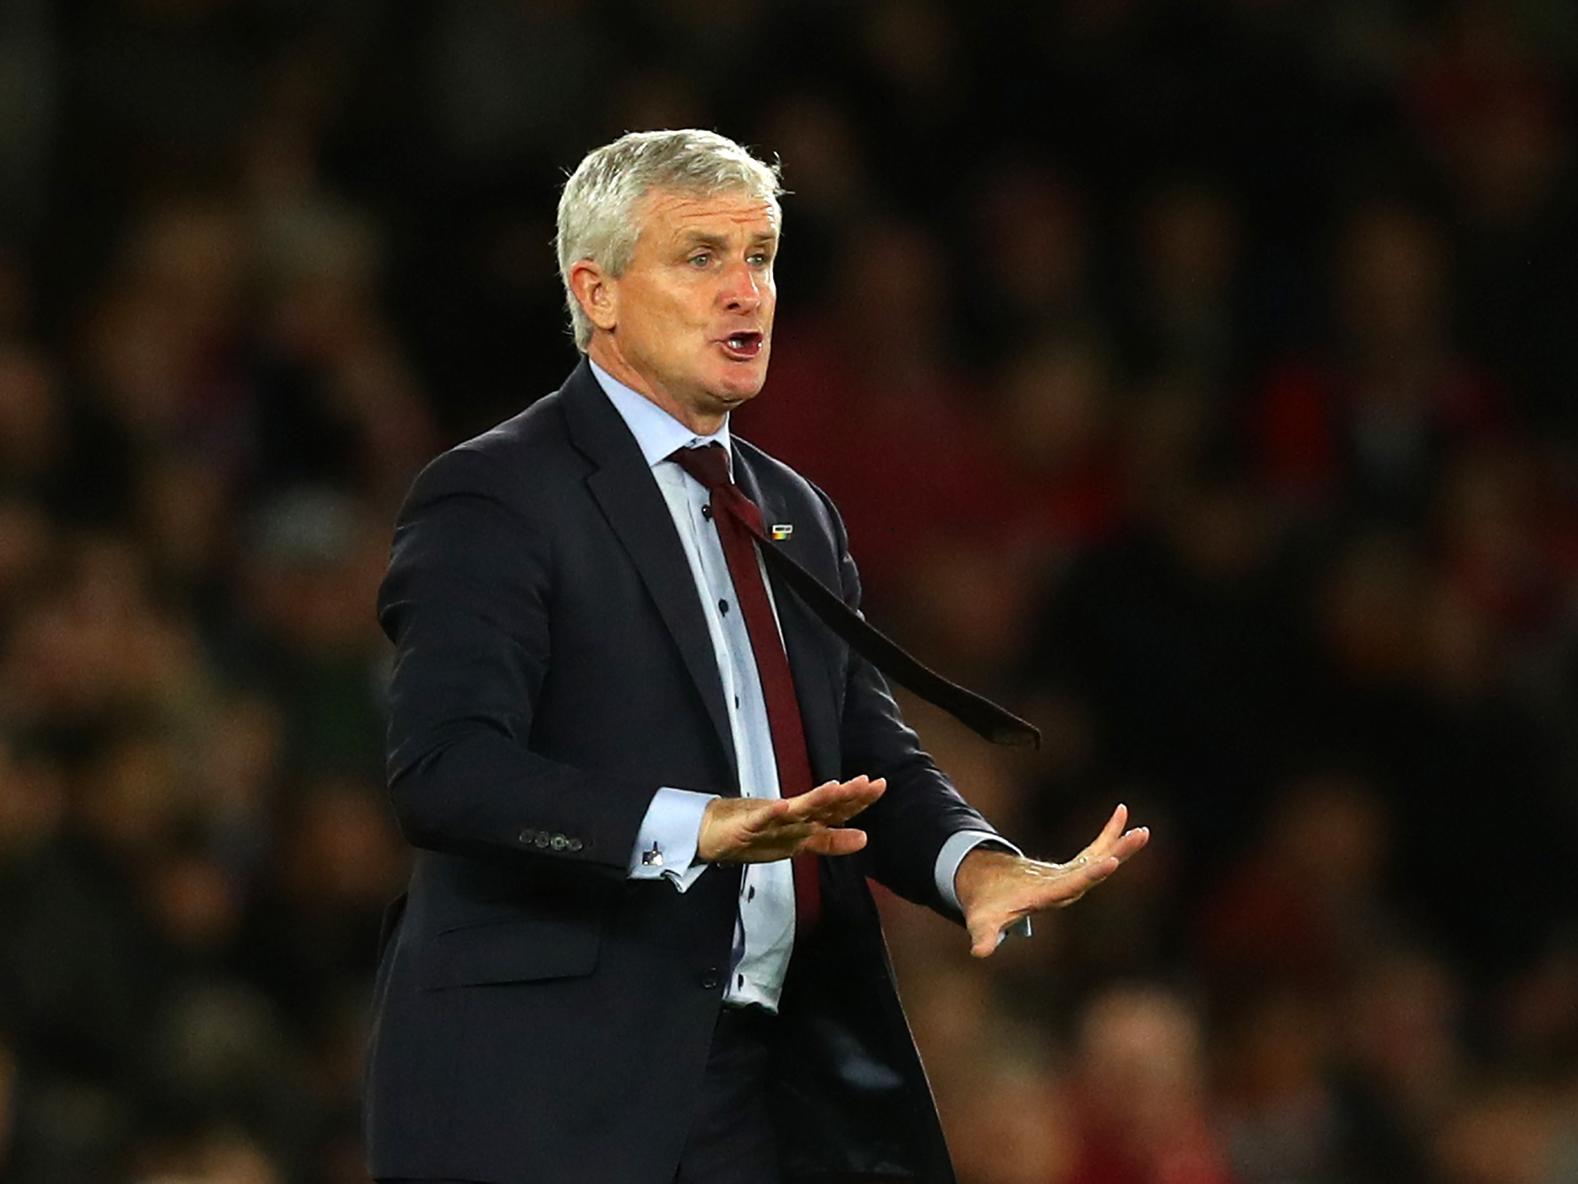 Barnsley and Reading are set to continue their quest to secure new managers, with Bobby Hassell tipped to manage the former, and Mark Hughes the favourite to take the reins at the latter. (Sky Bet)